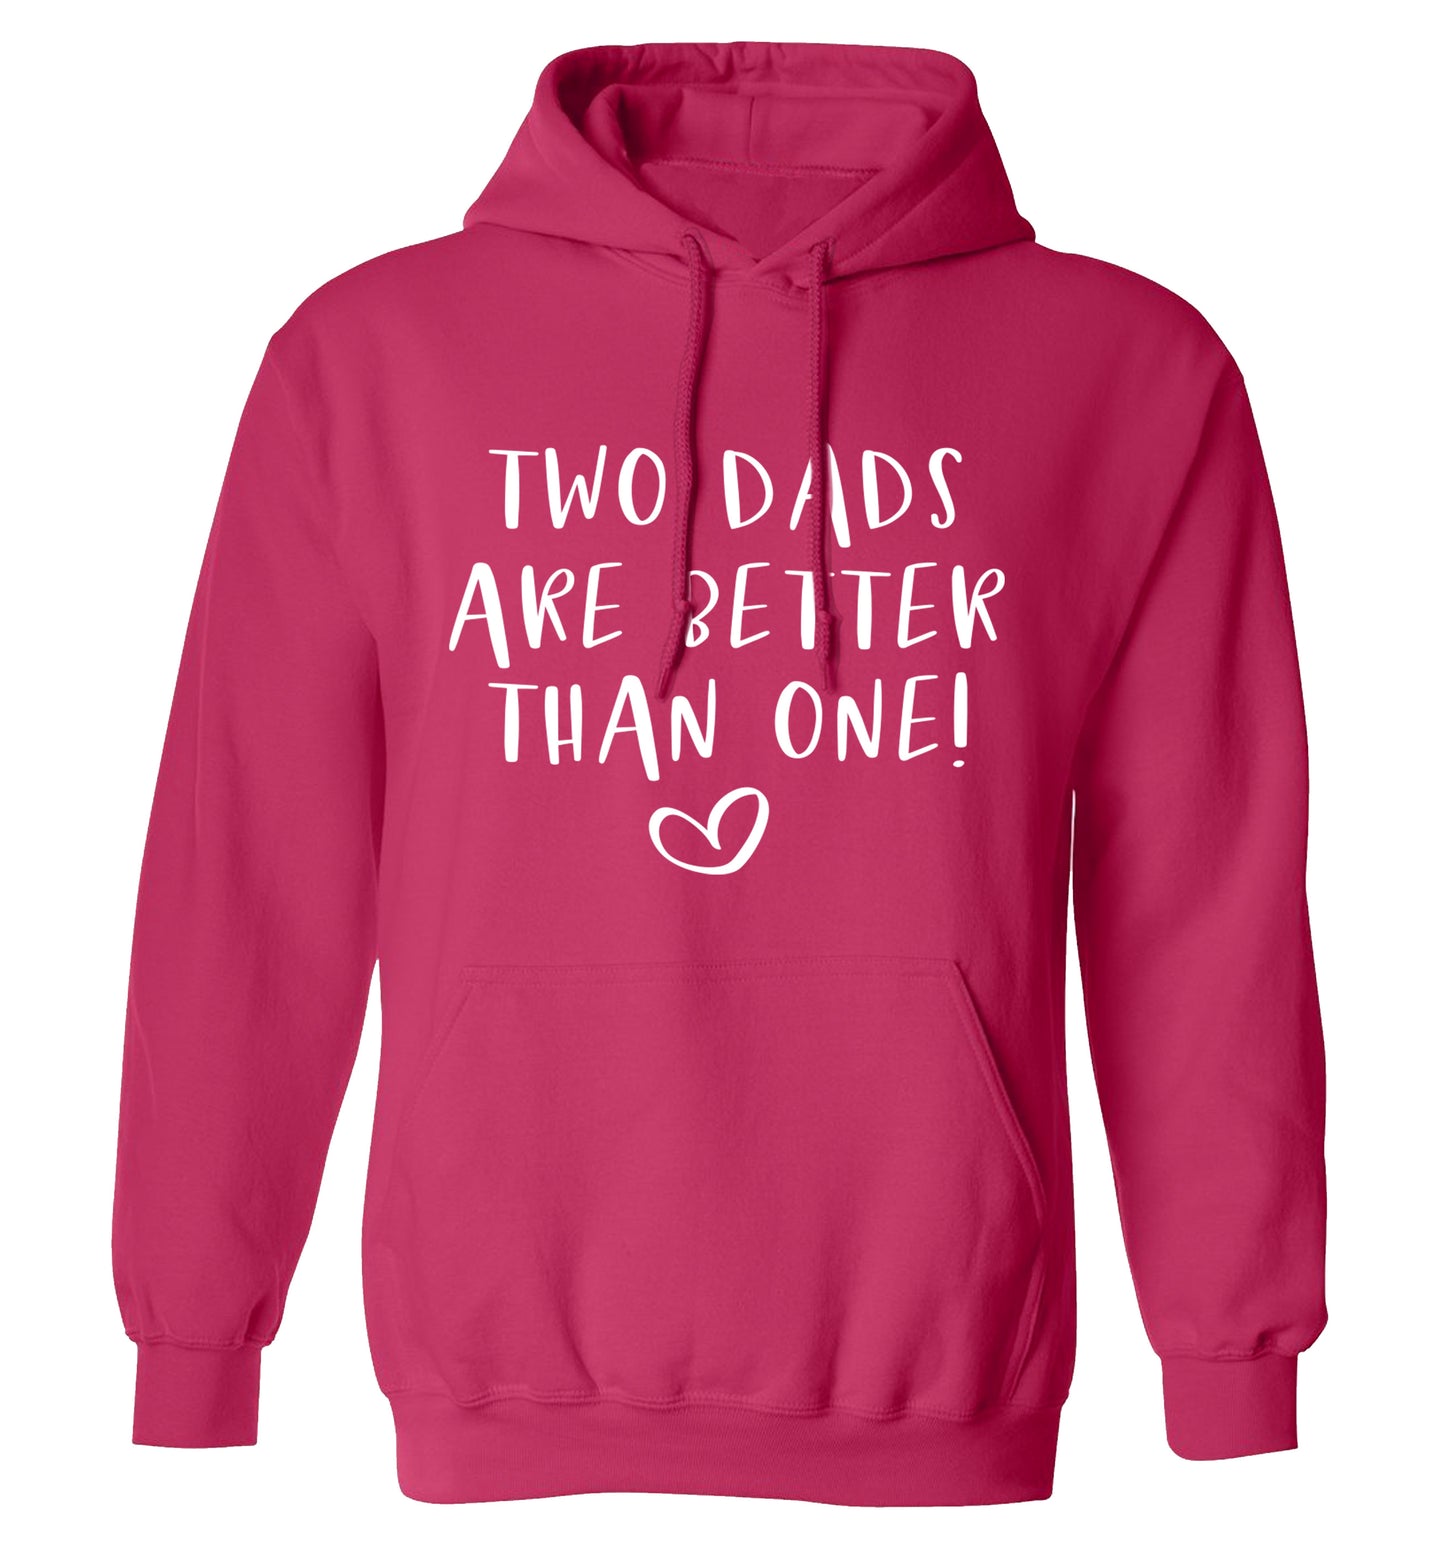 Two dads are better than one adults unisex pink hoodie 2XL